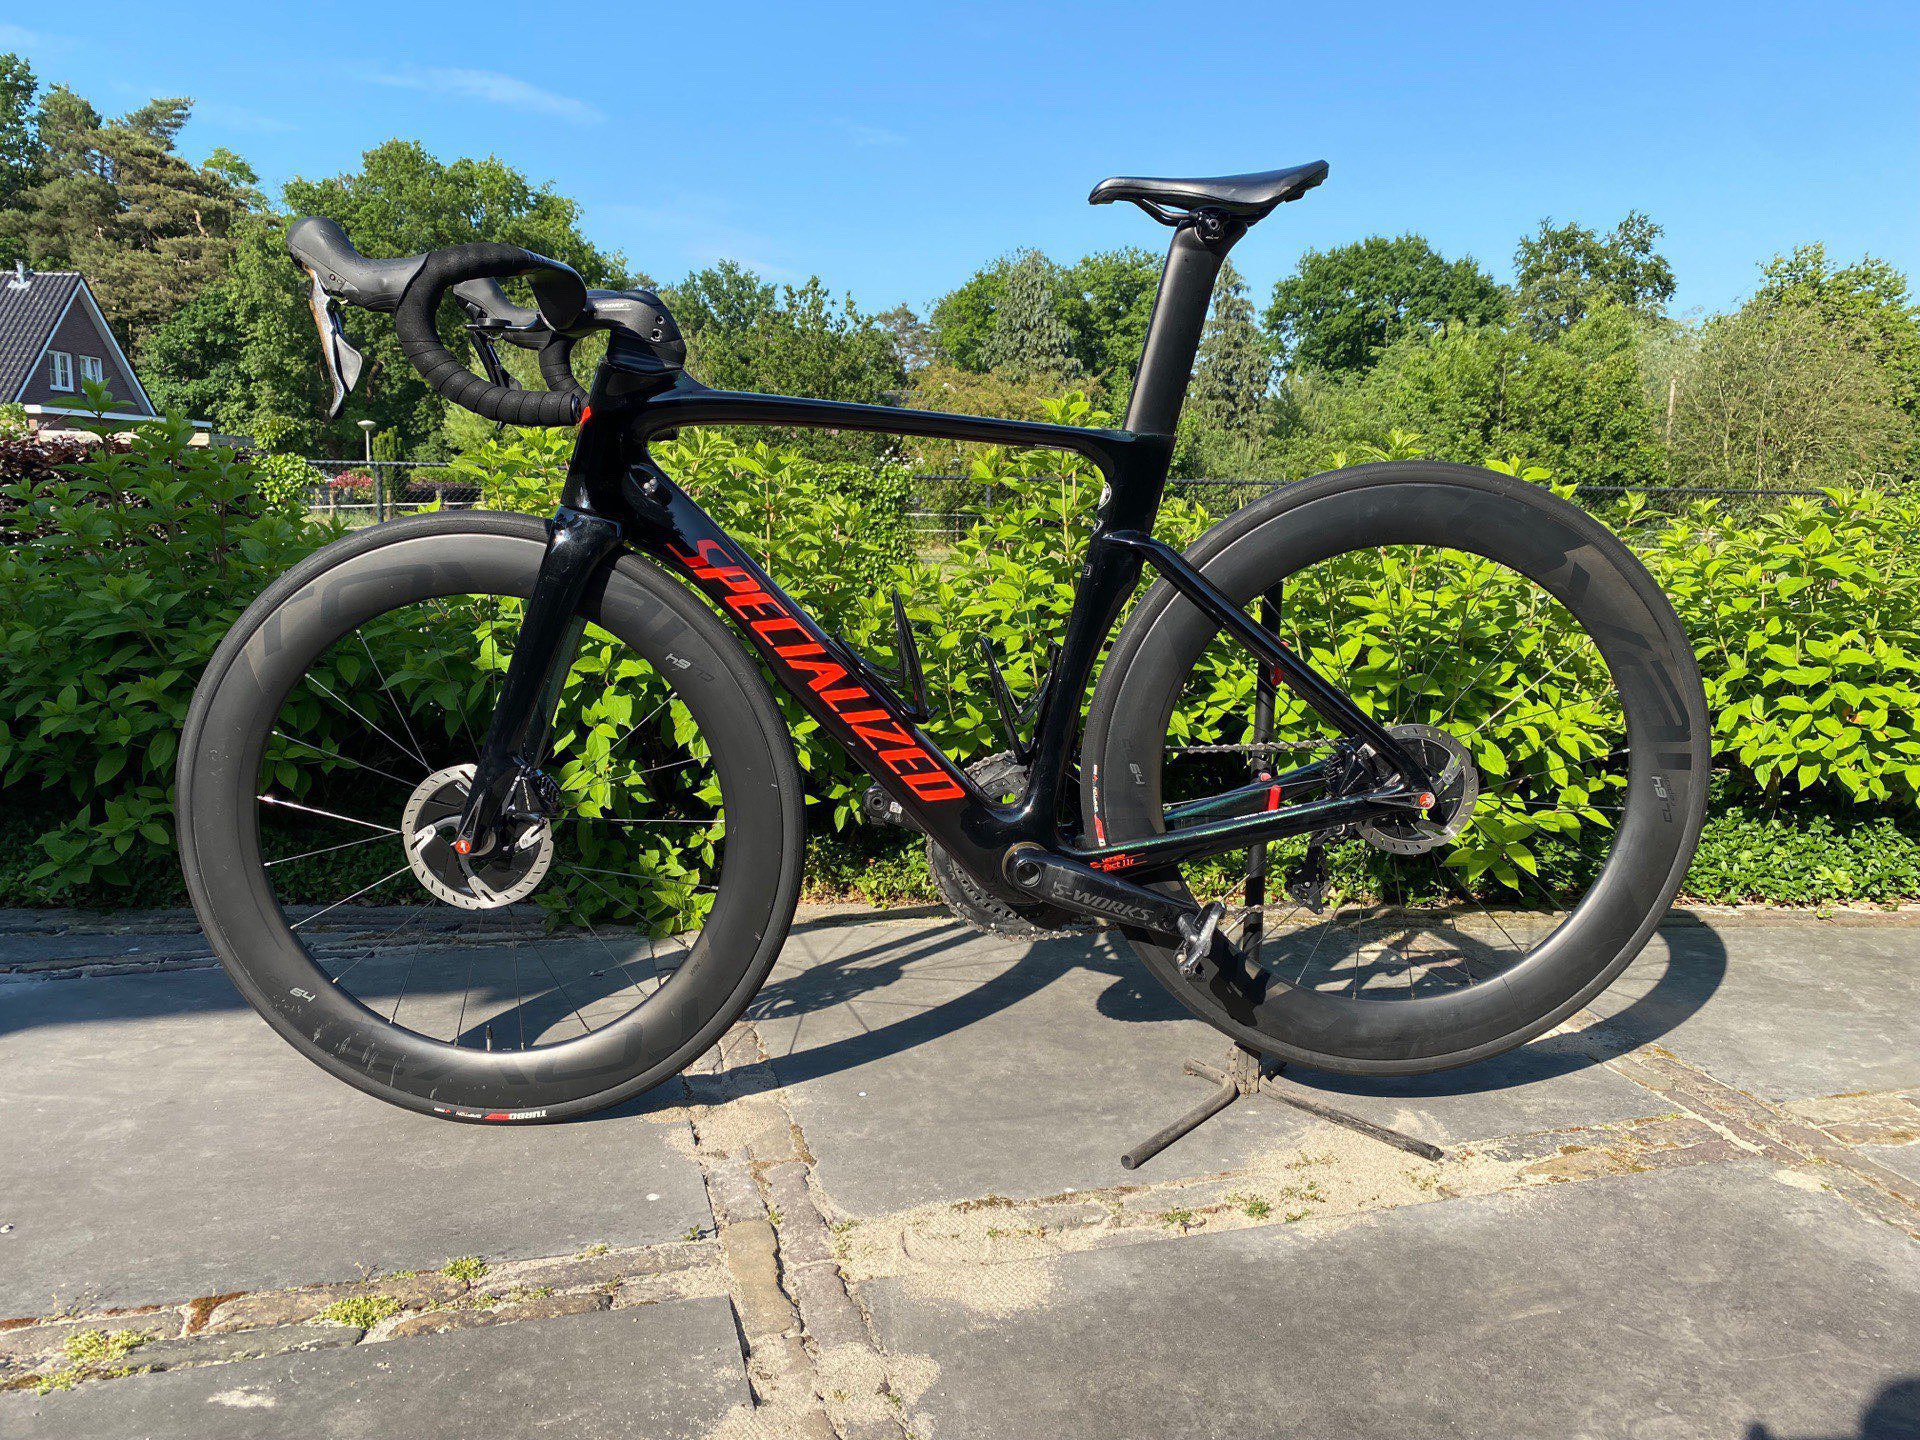 Specialized Venge Pro Disc Review - An Aero Road Bike We Love